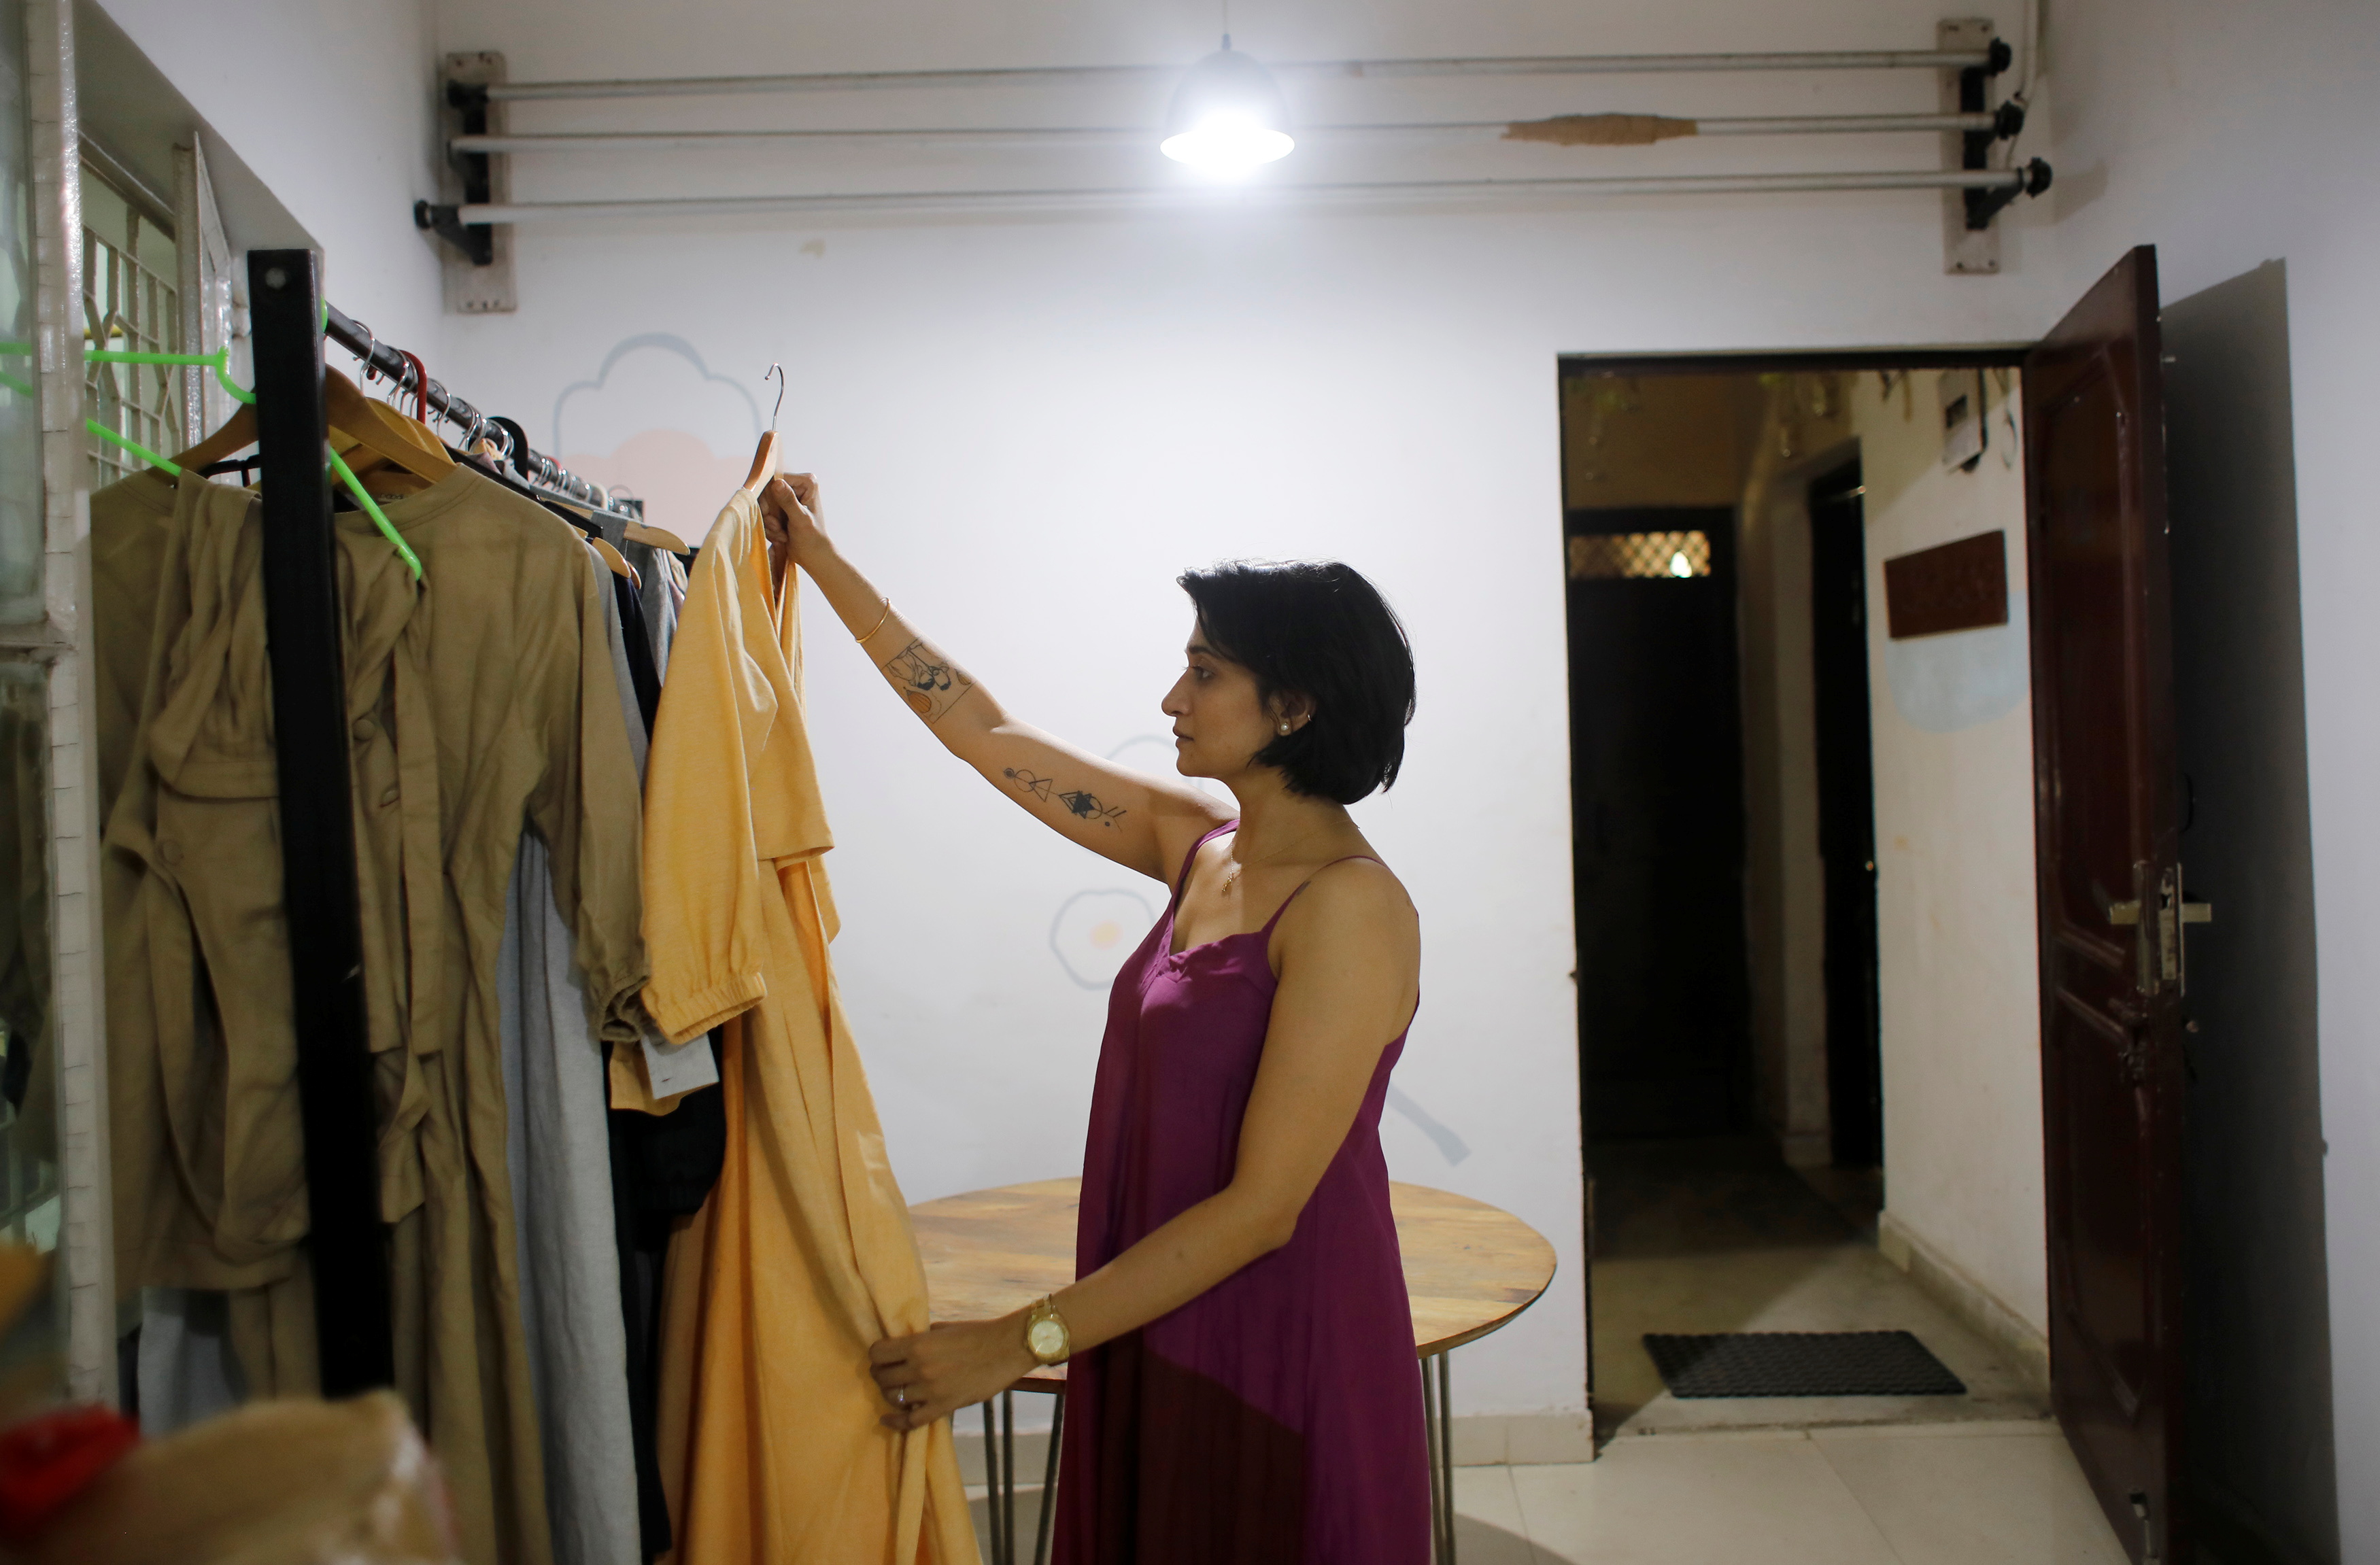 Humble Indian fabric takes fashion world by storm - Nikkei Asia